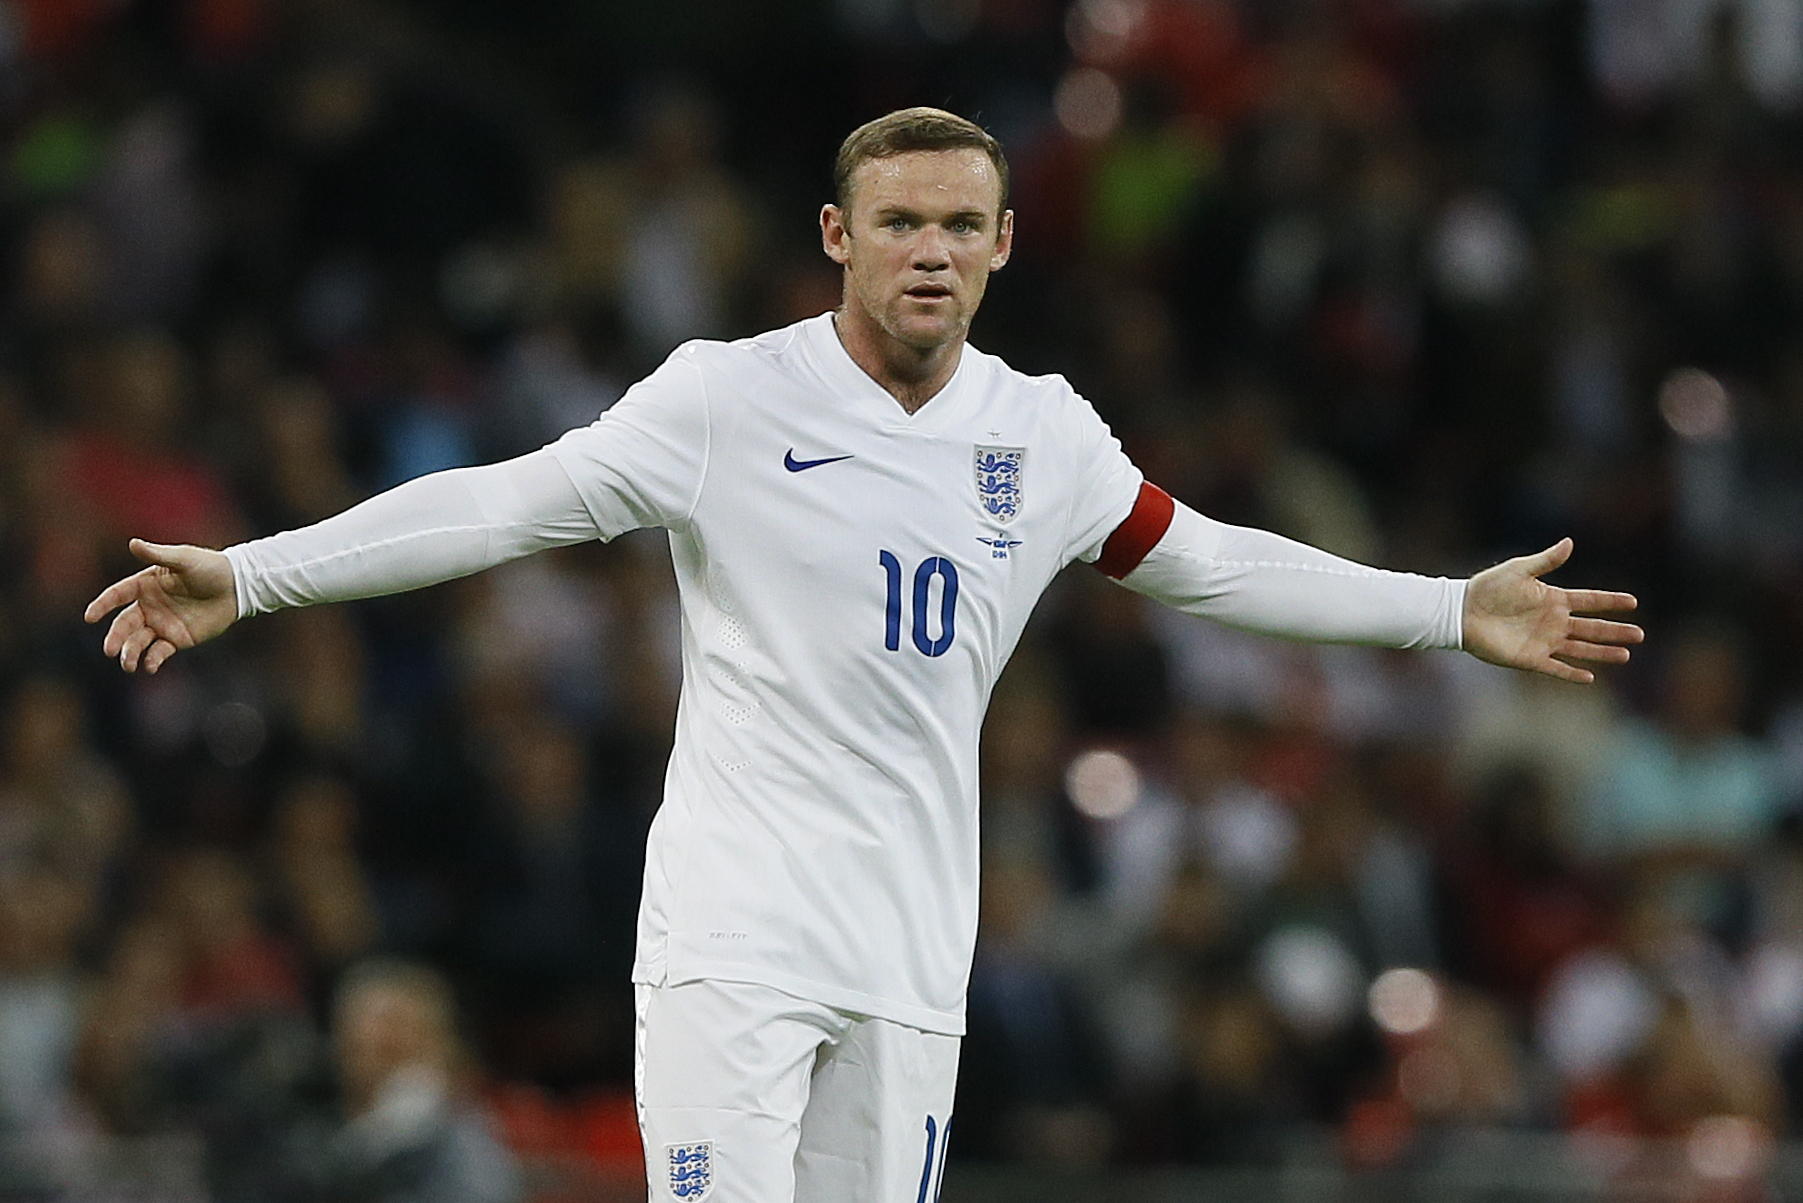 What position did Wayne Rooney primarily play during his career?